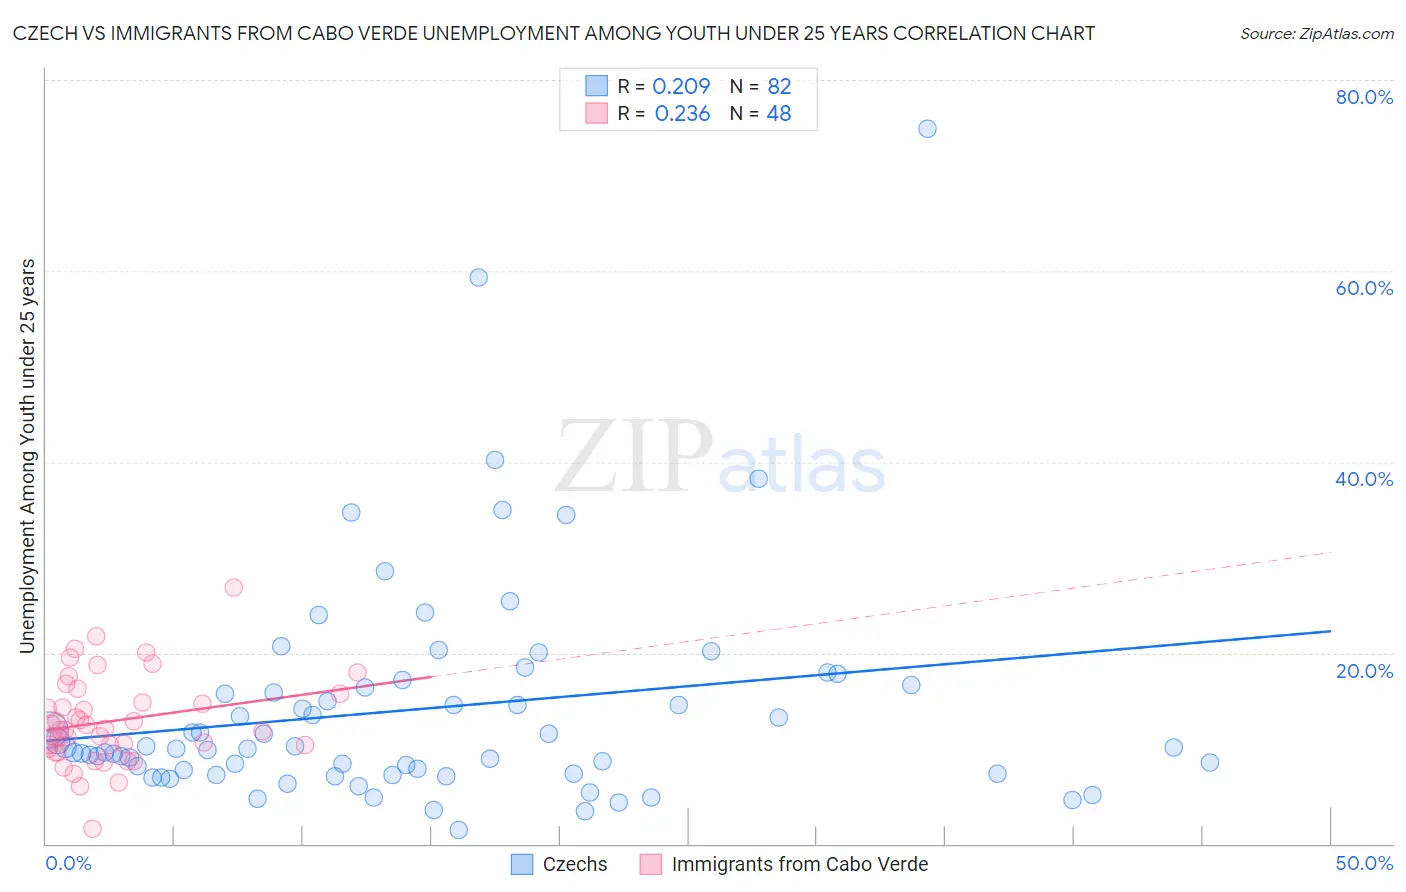 Czech vs Immigrants from Cabo Verde Unemployment Among Youth under 25 years